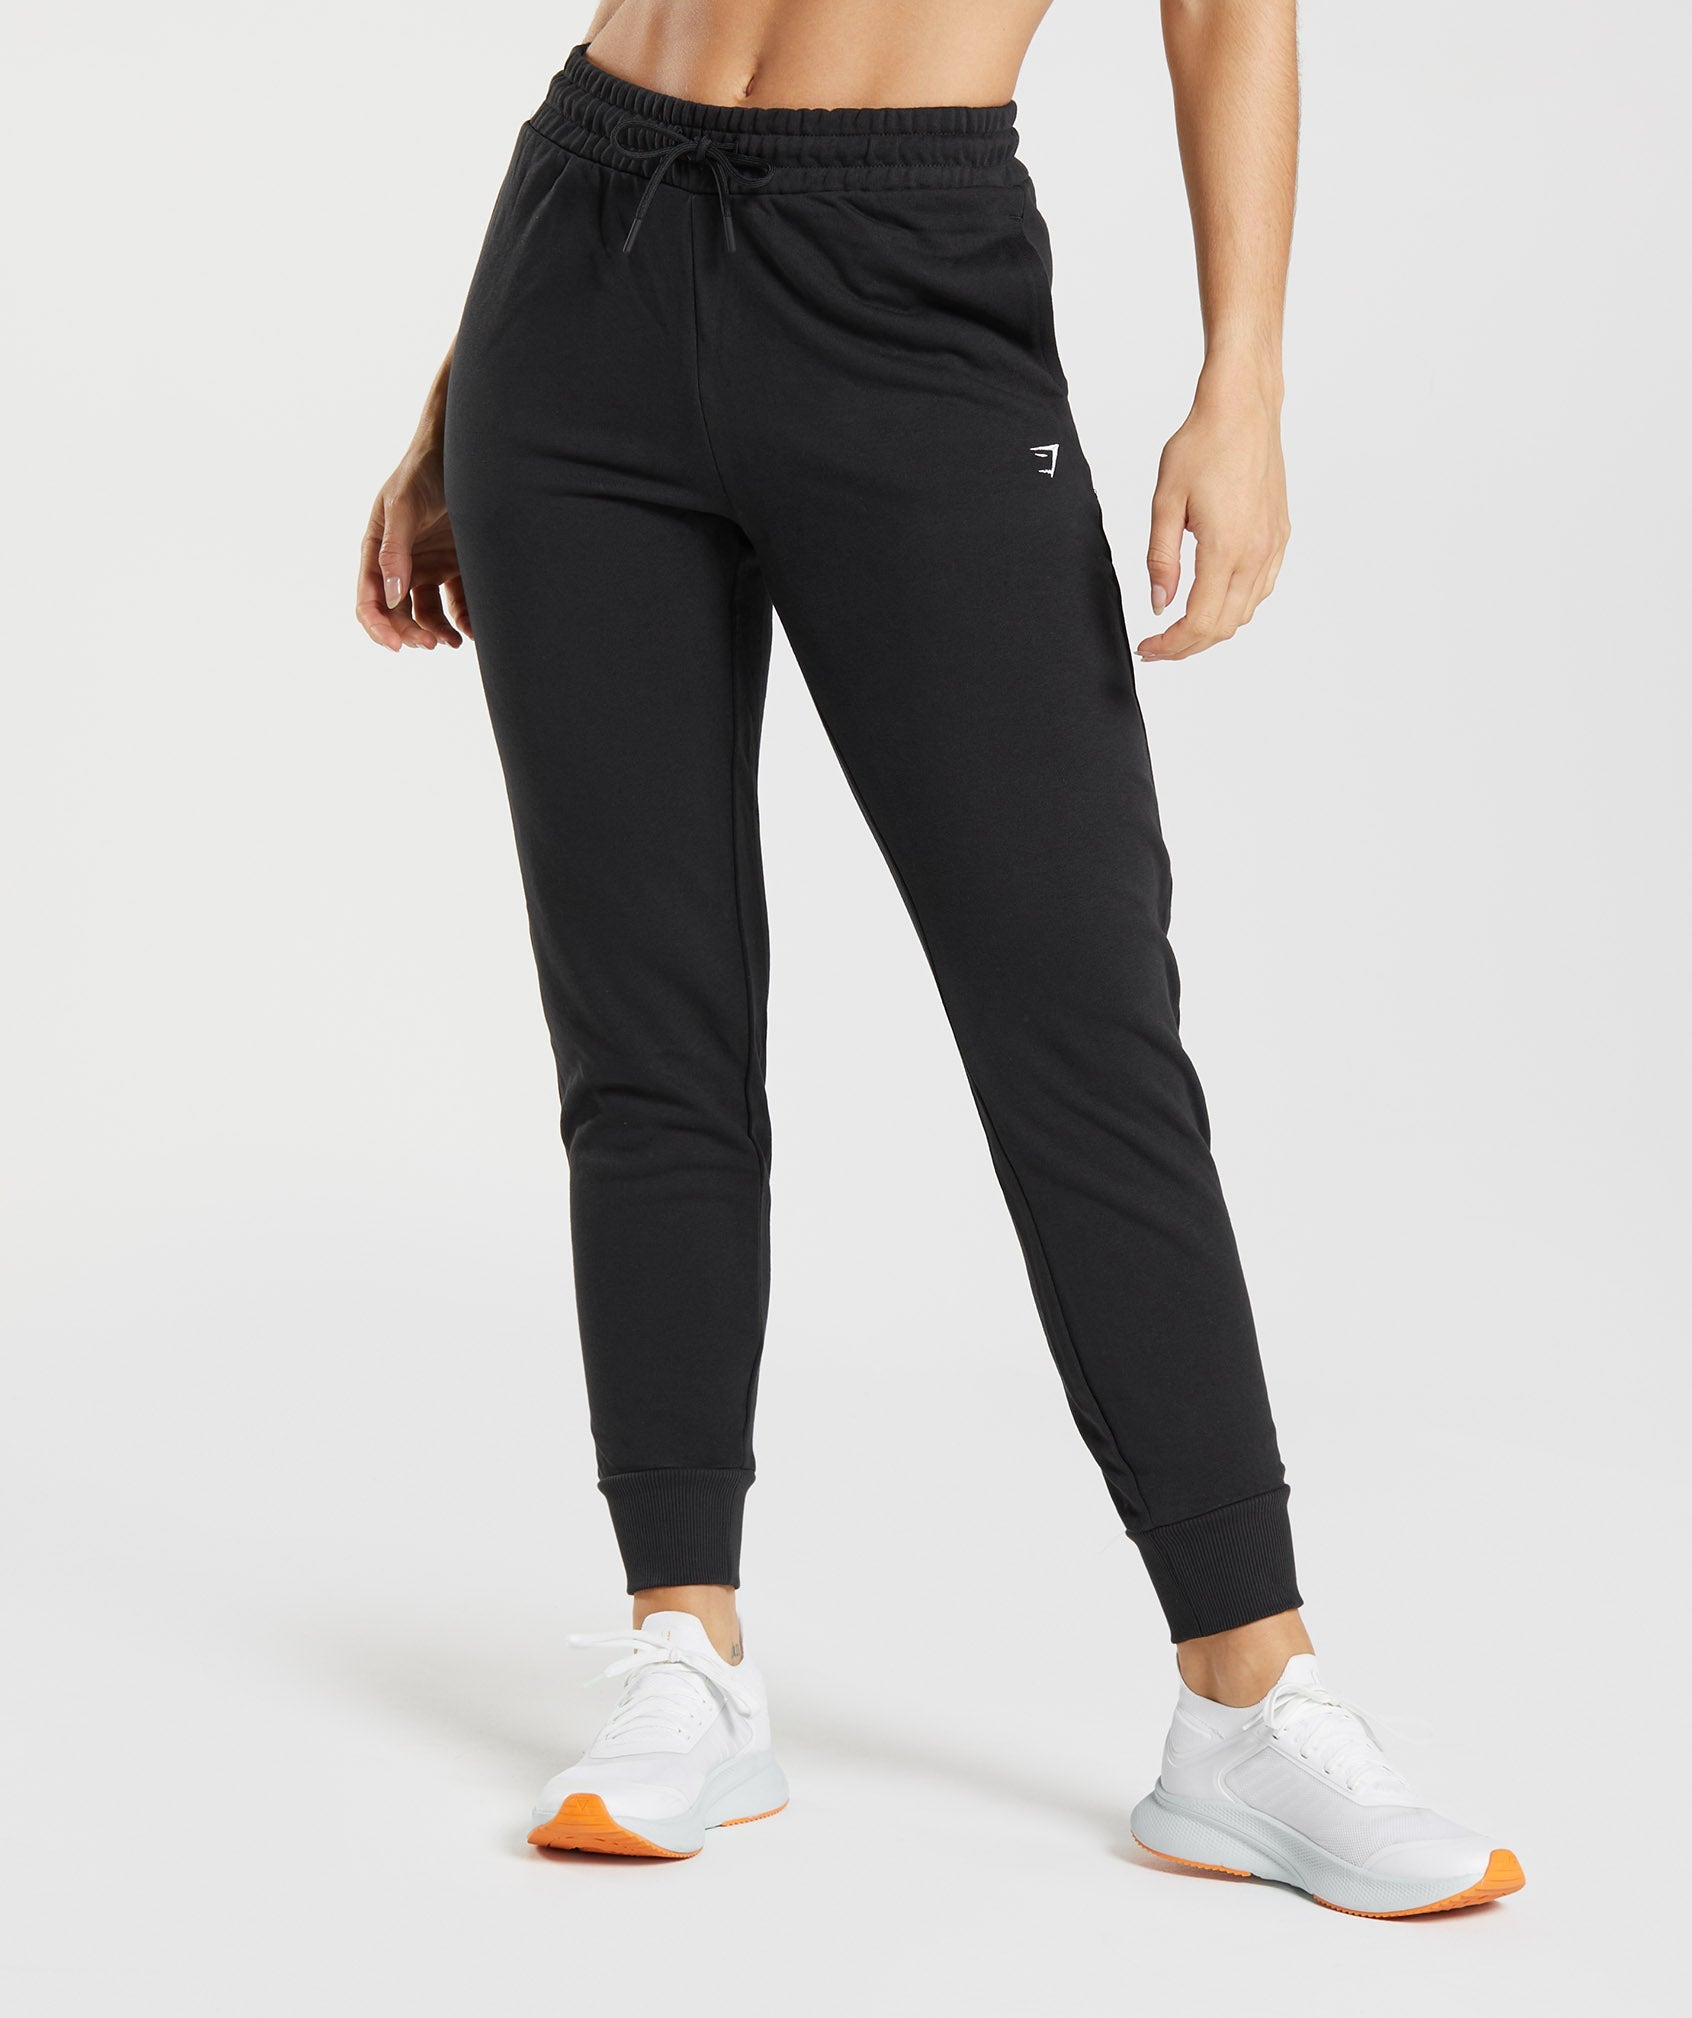 Gymshark Pippa Training Joggers  Pants for women, Clothes design, Gymshark  joggers